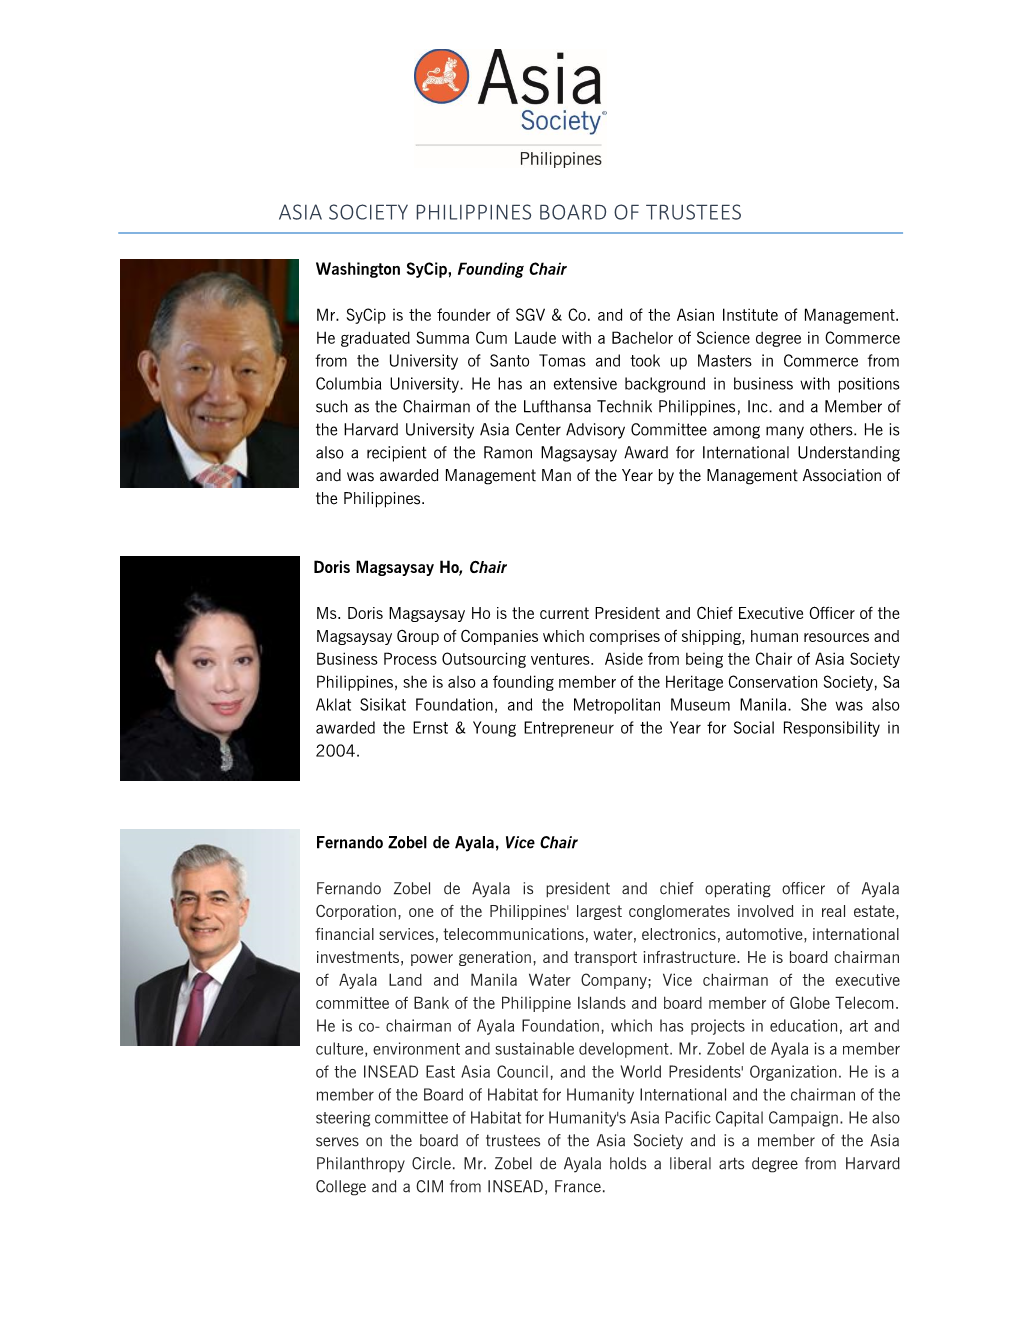 Asia Society Philippines Board of Trustees